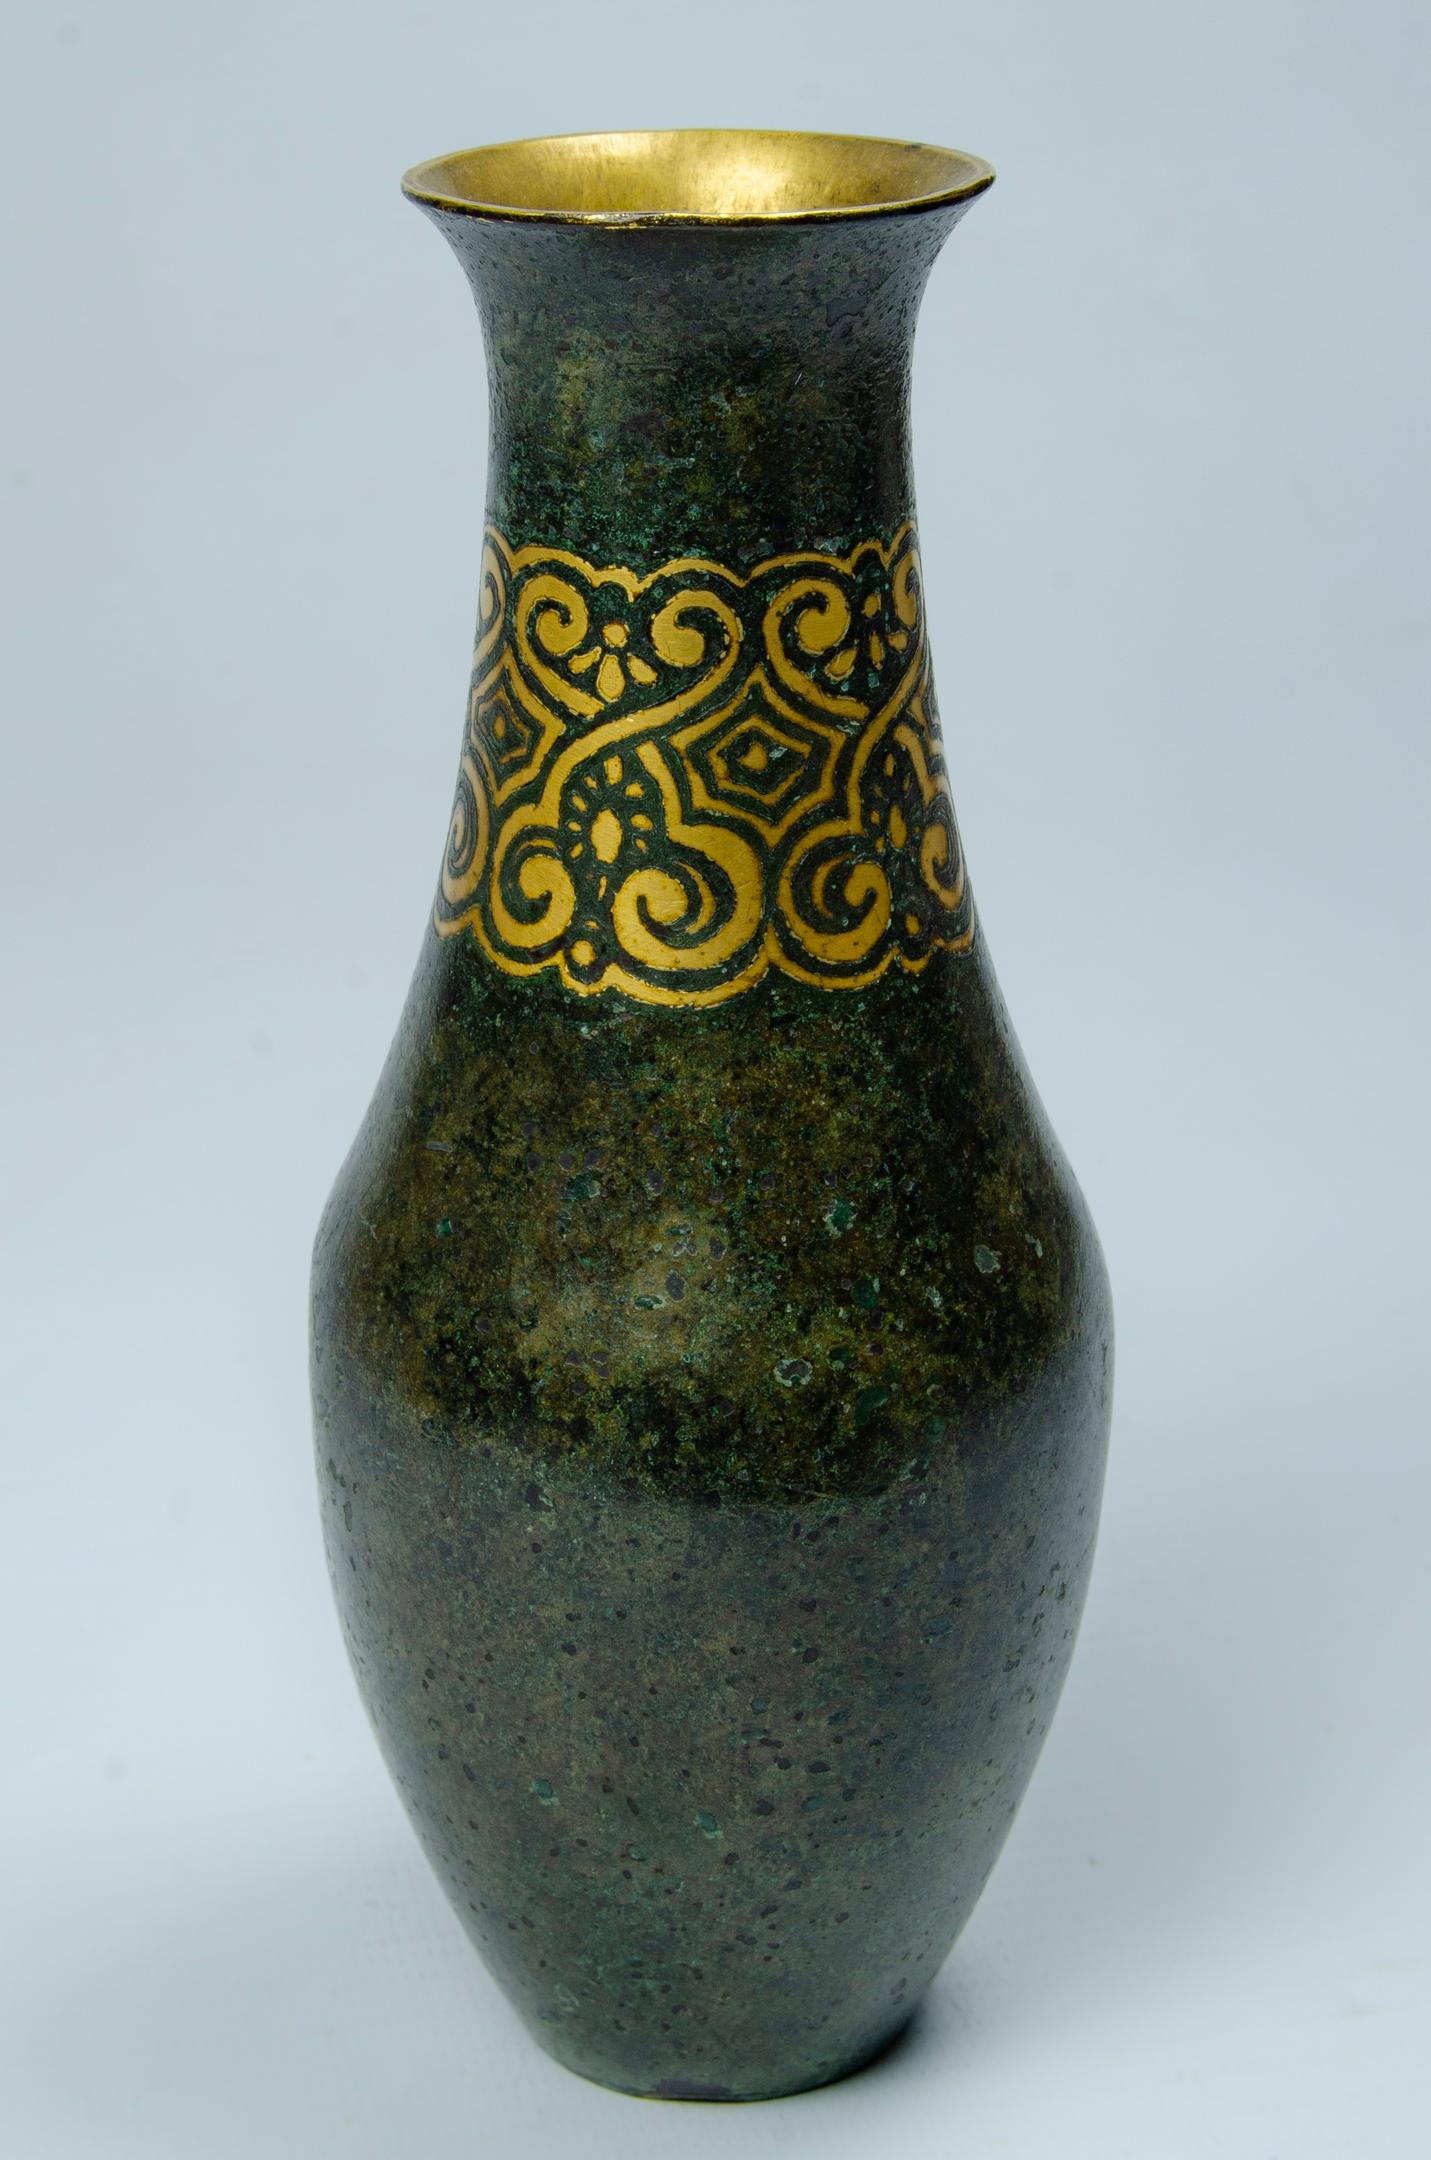 Christofle Dinanderie Vase small
Art Deco design circa 1930
Bronze in Dinanderie Origin France
small bumps and some wear on the skid.